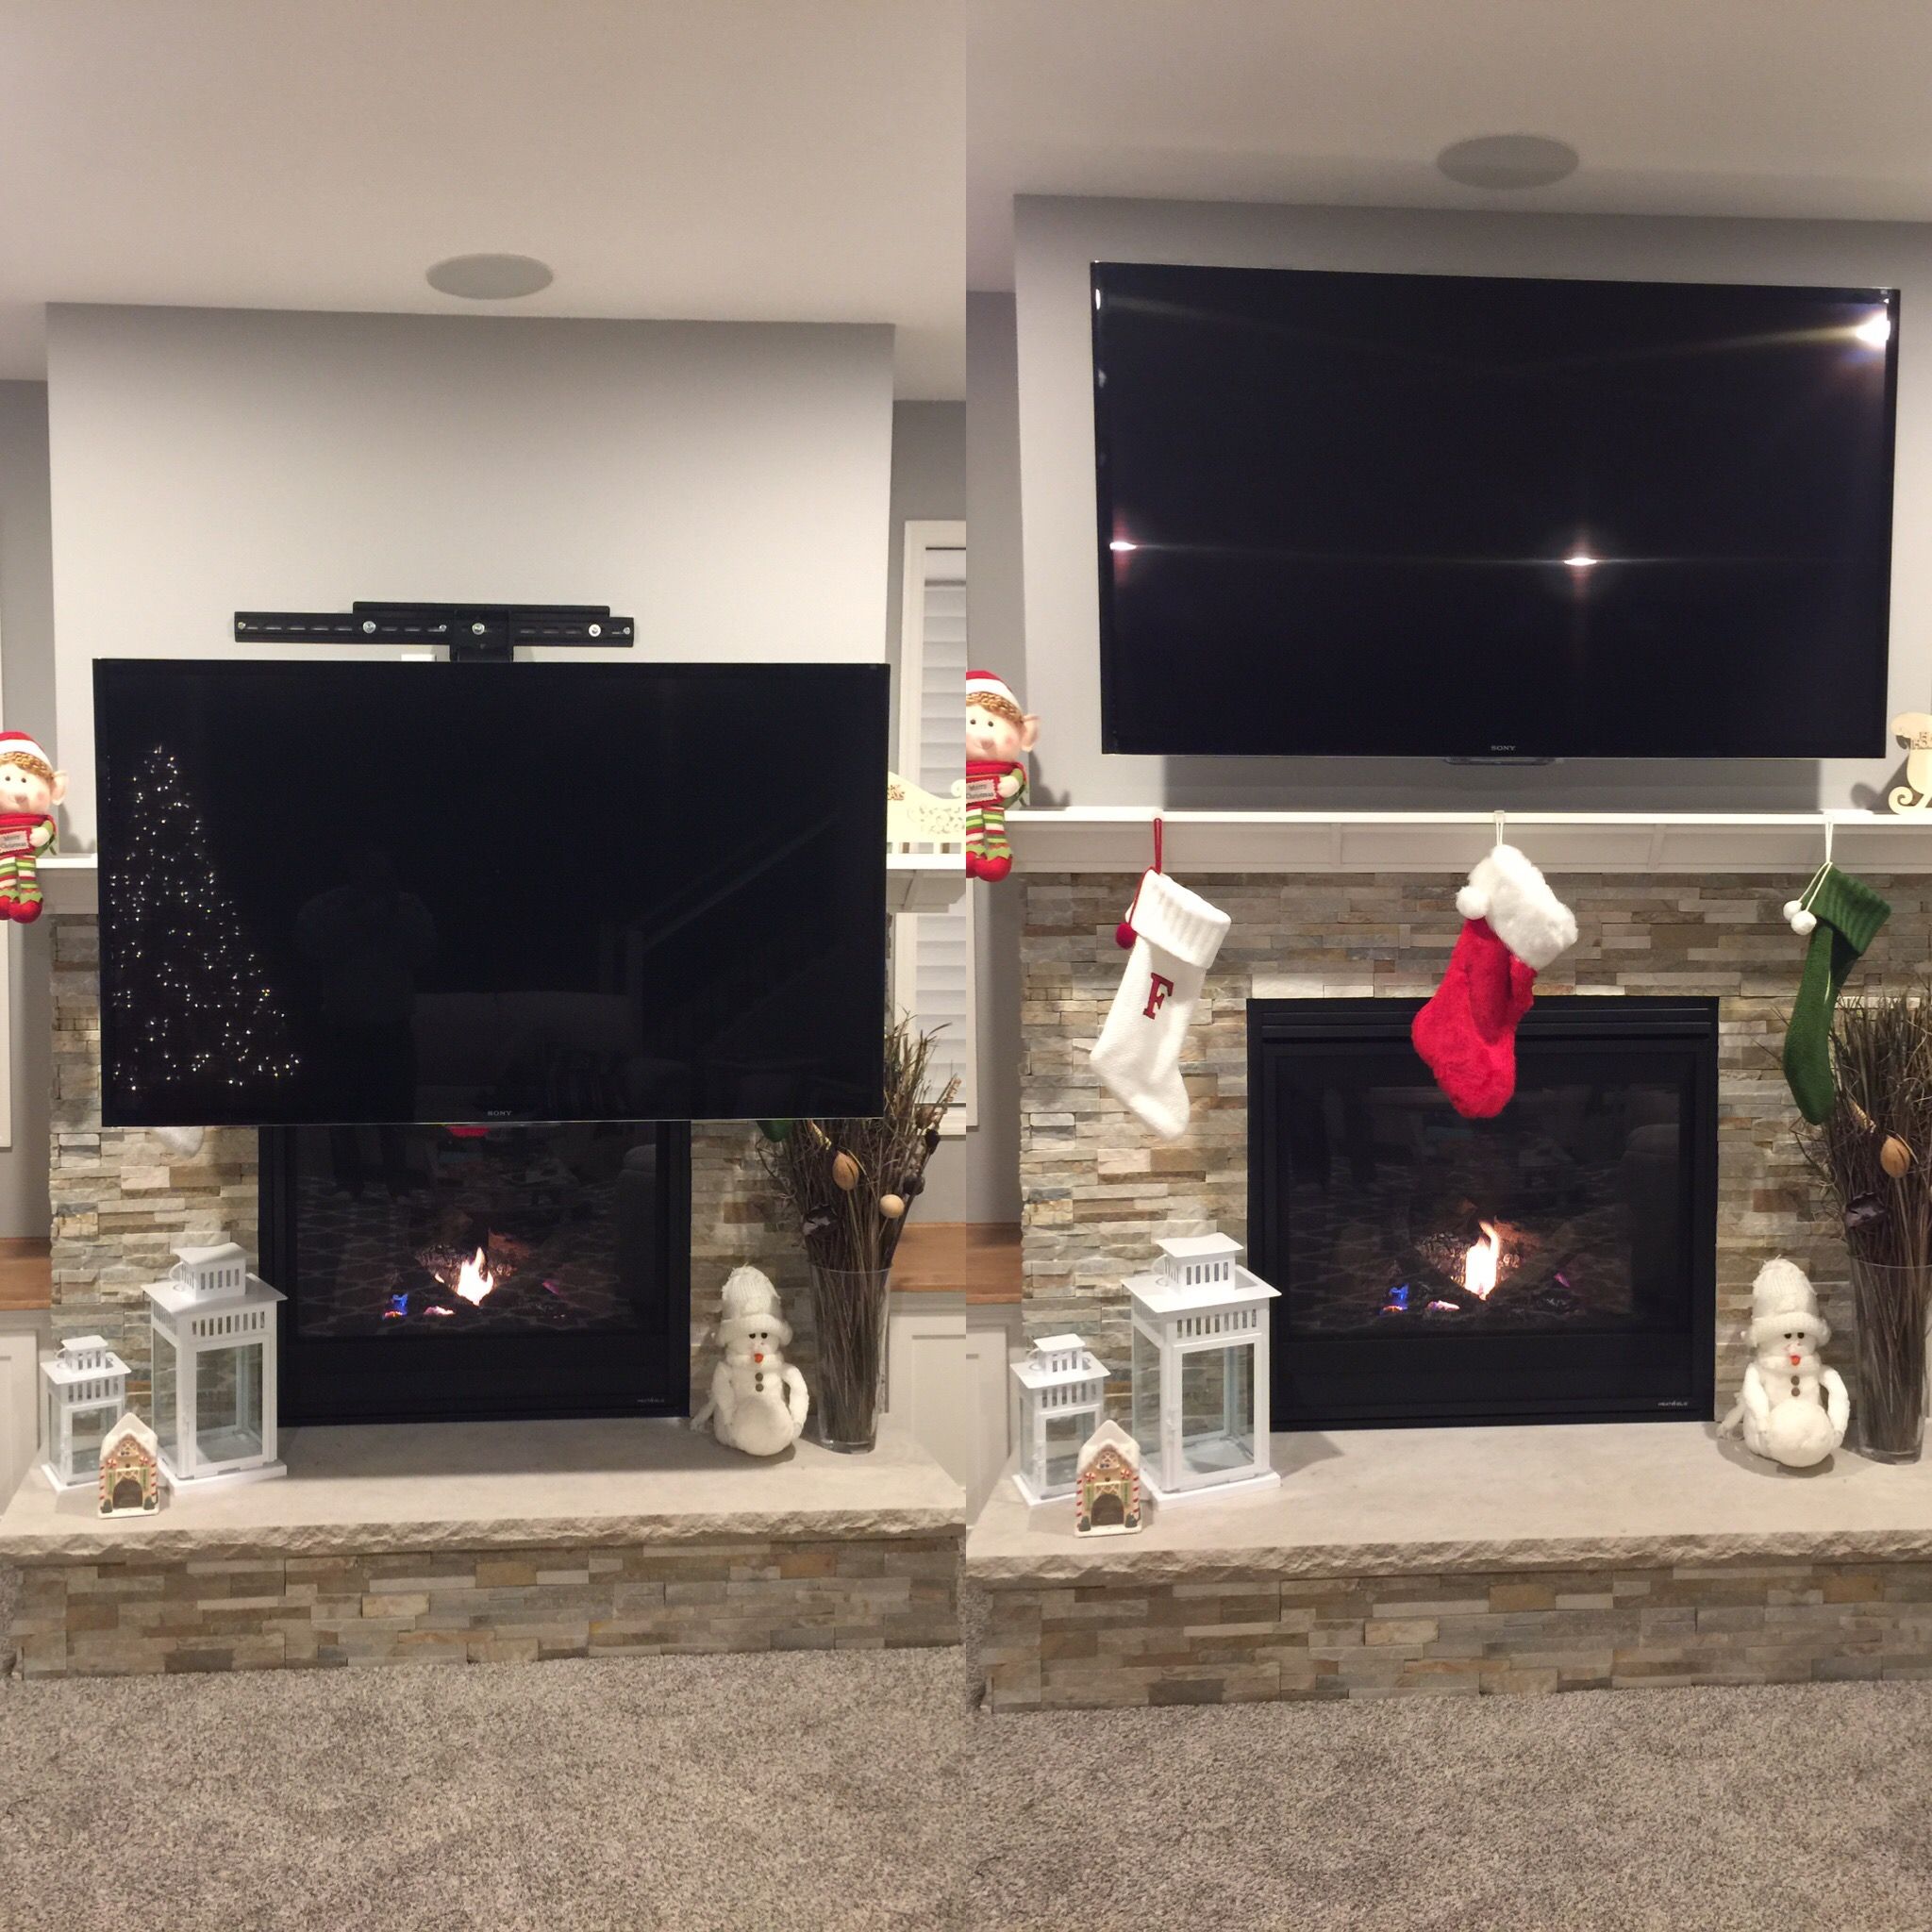 Can You Hang A Tv Over A Fireplace Elegant 49 Best Dynamic Mount Bracket Images In 2019